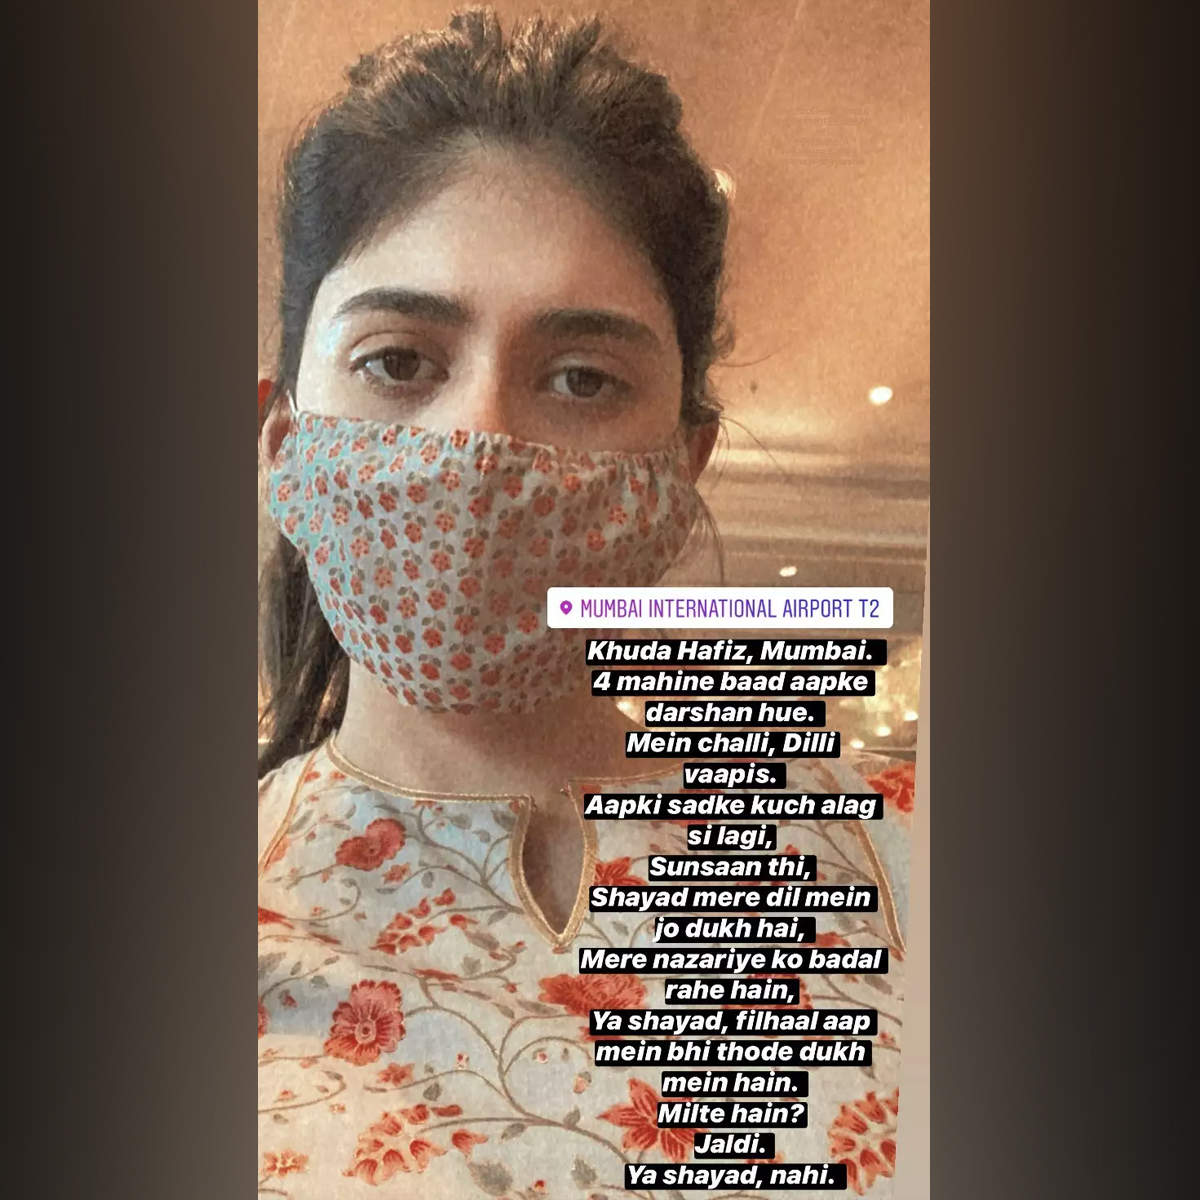 Sushant Singh Rajput’s ‘Dil Bechara’ co-star Sanjana Sanghi gives her statement to Mumbai Police and leaves Mumbai; hinting at never returning 8